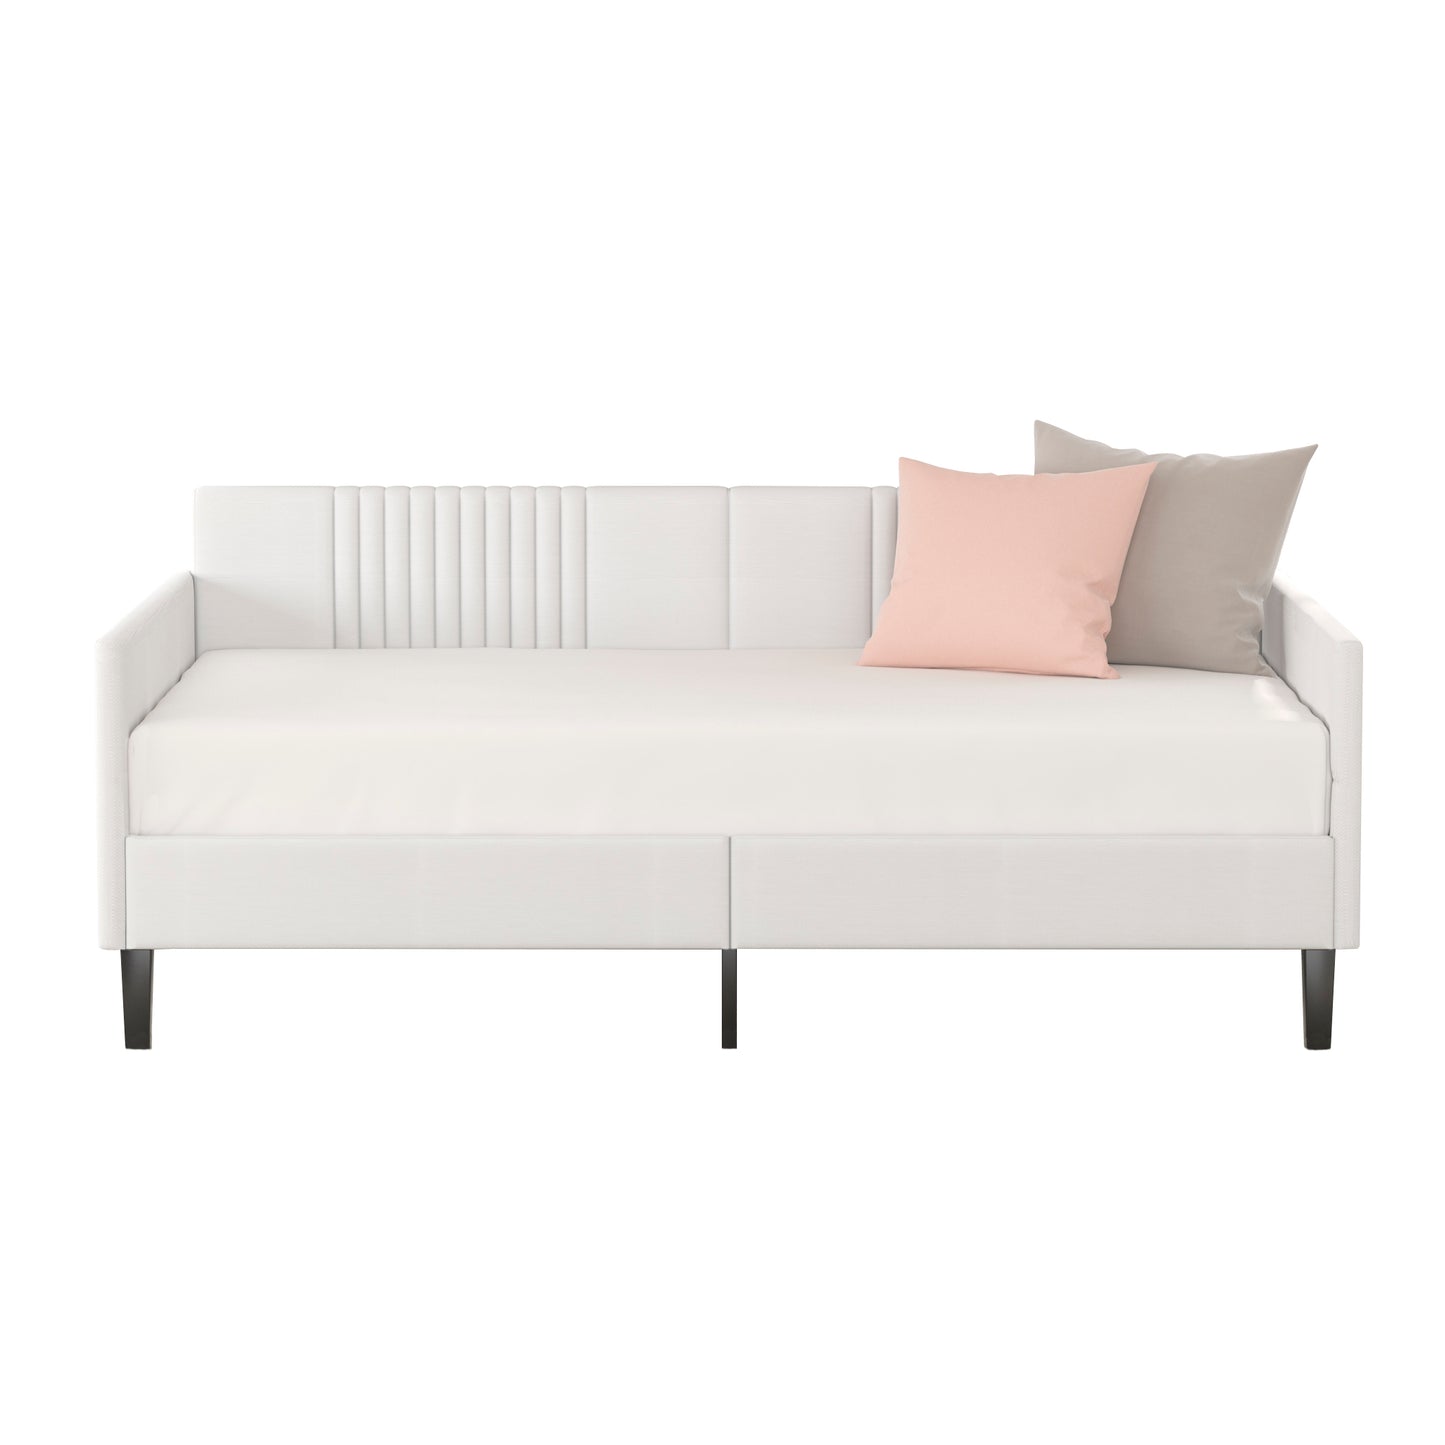 Nia Twin Size Off White Linen Upholstered Daybed, Modern-Contemporary Design, with Vertical tufting Backrest.